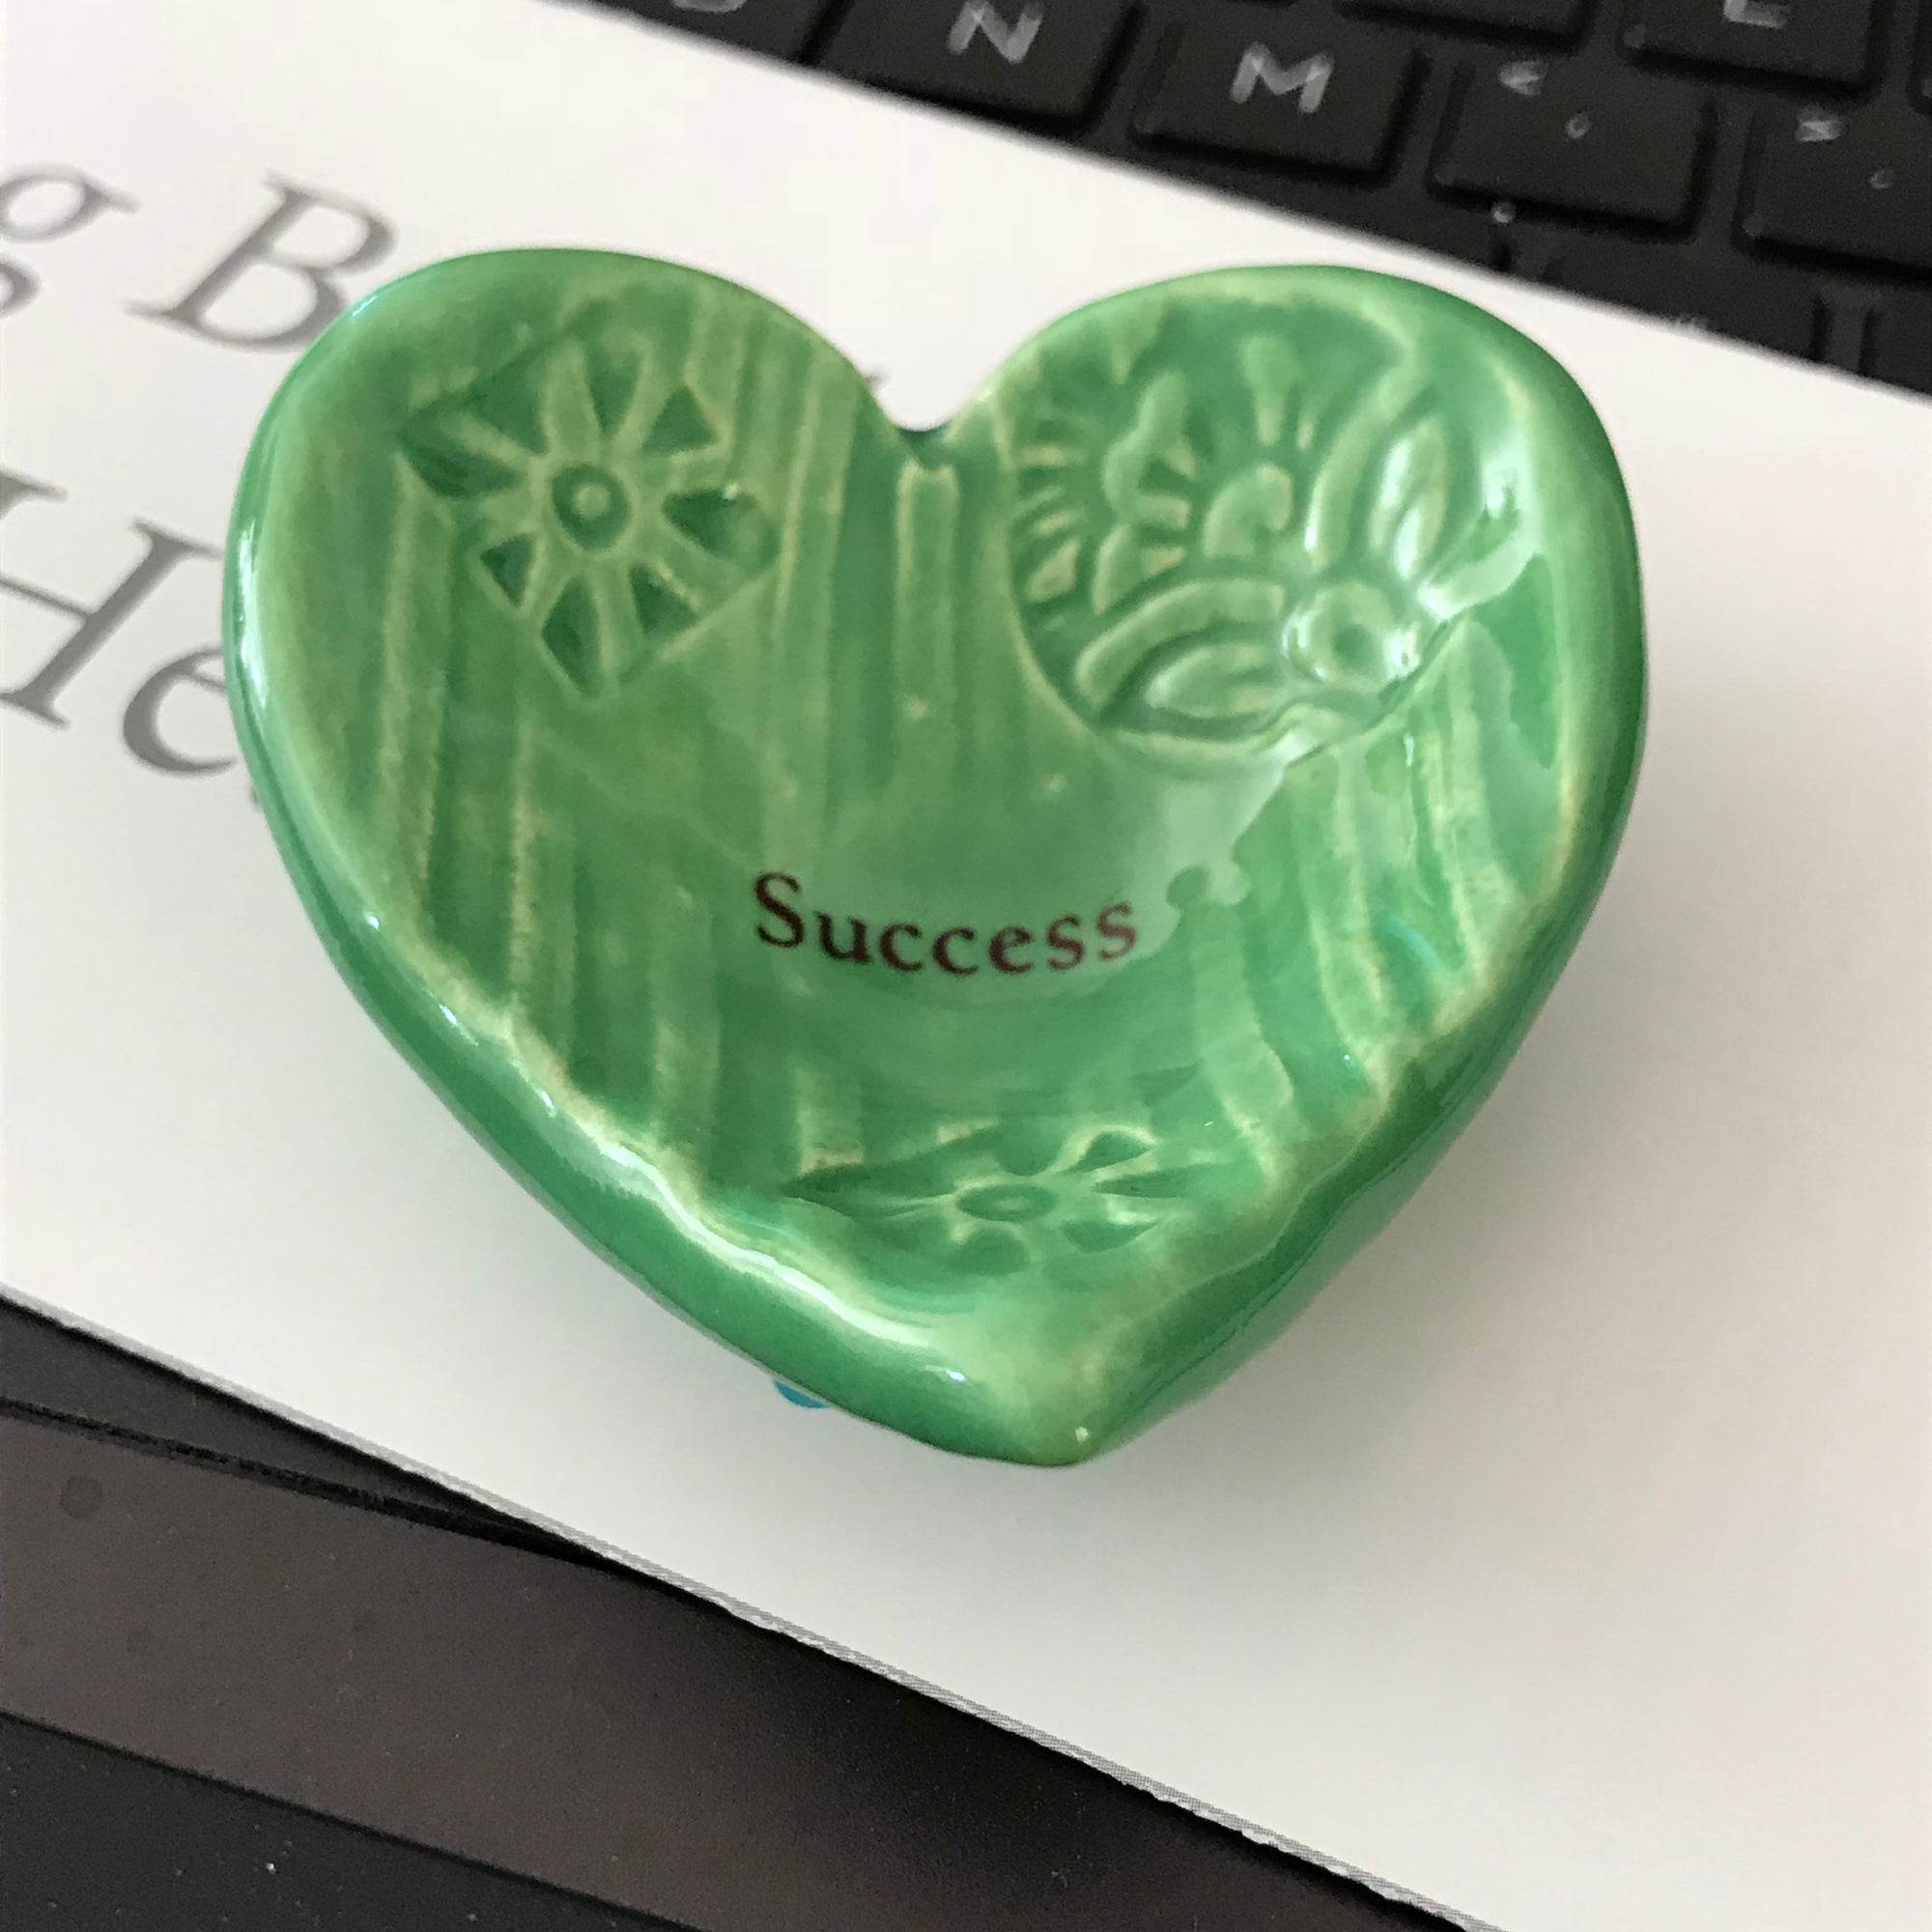 Giving Heart imprinted with the word "Success".   A gift for family or friends that shows your support.  Shown in emerald green glaze.